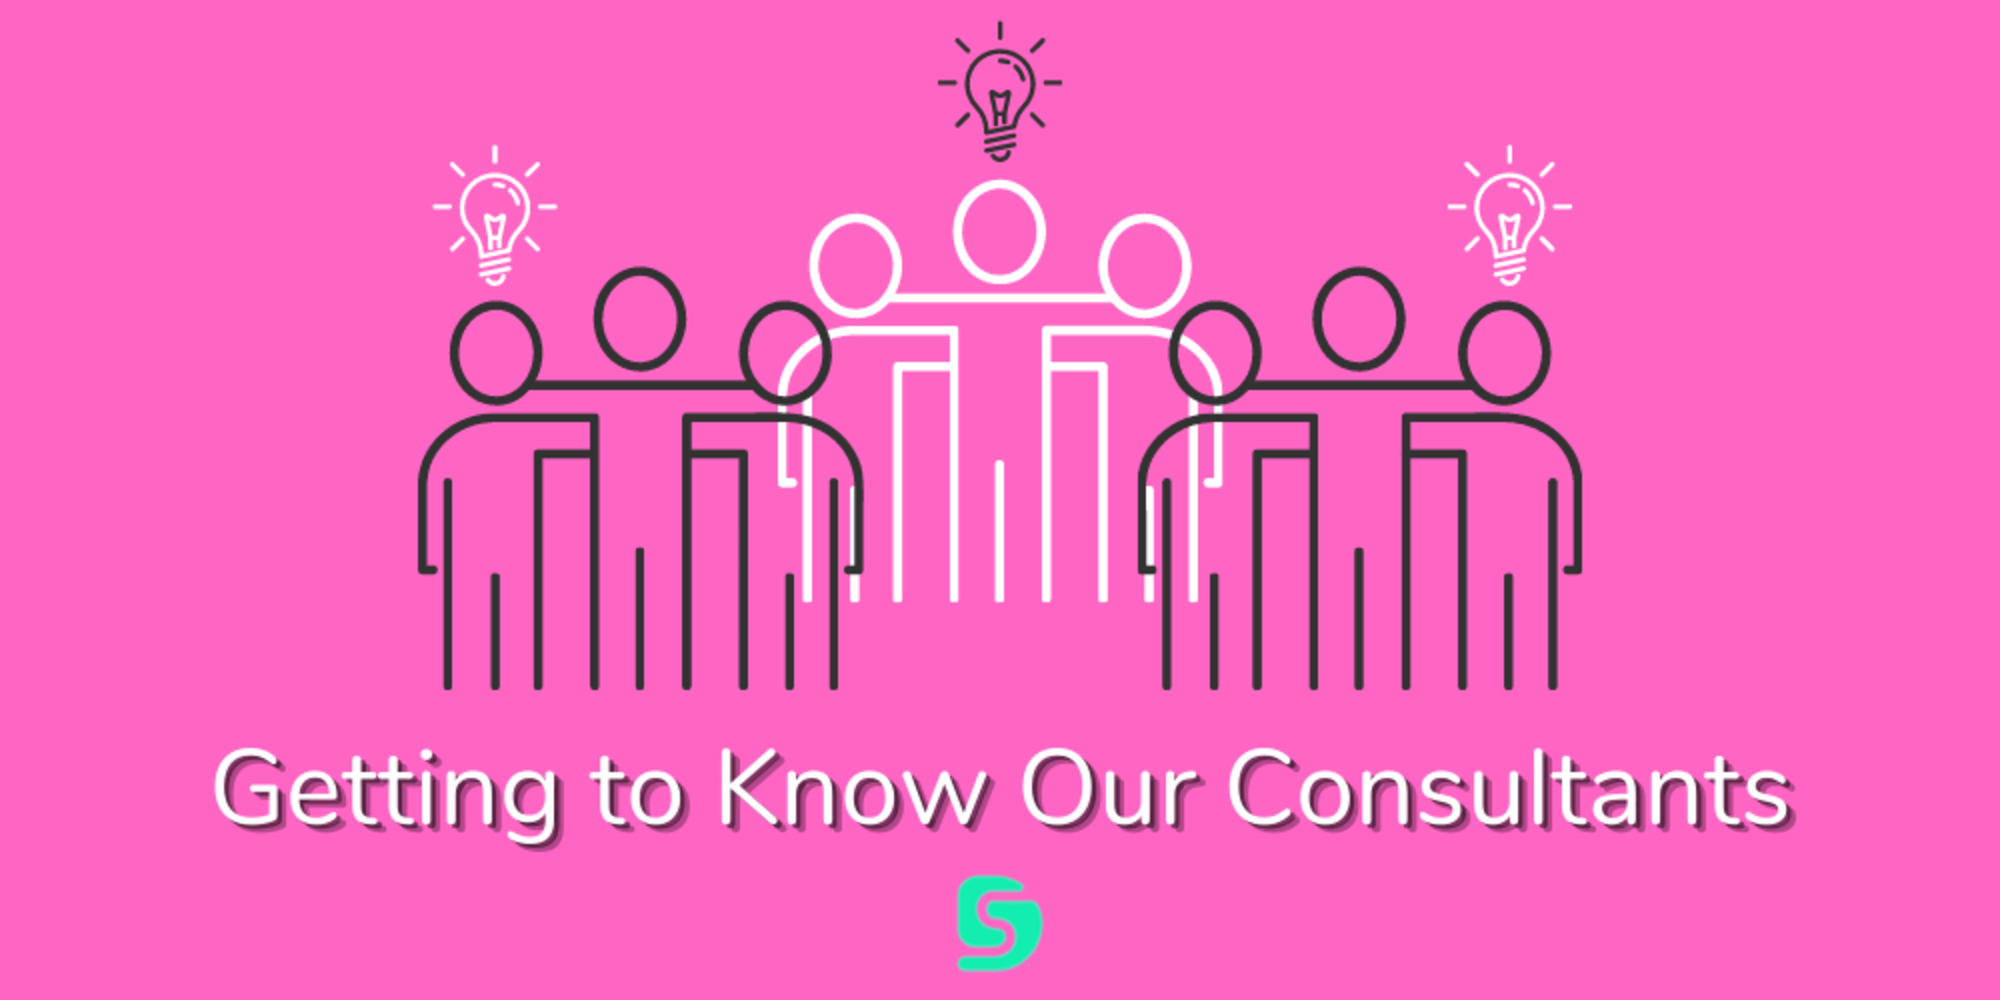 Getting To Know Our Consultants   10 Questions Over 10 Weeks (5)